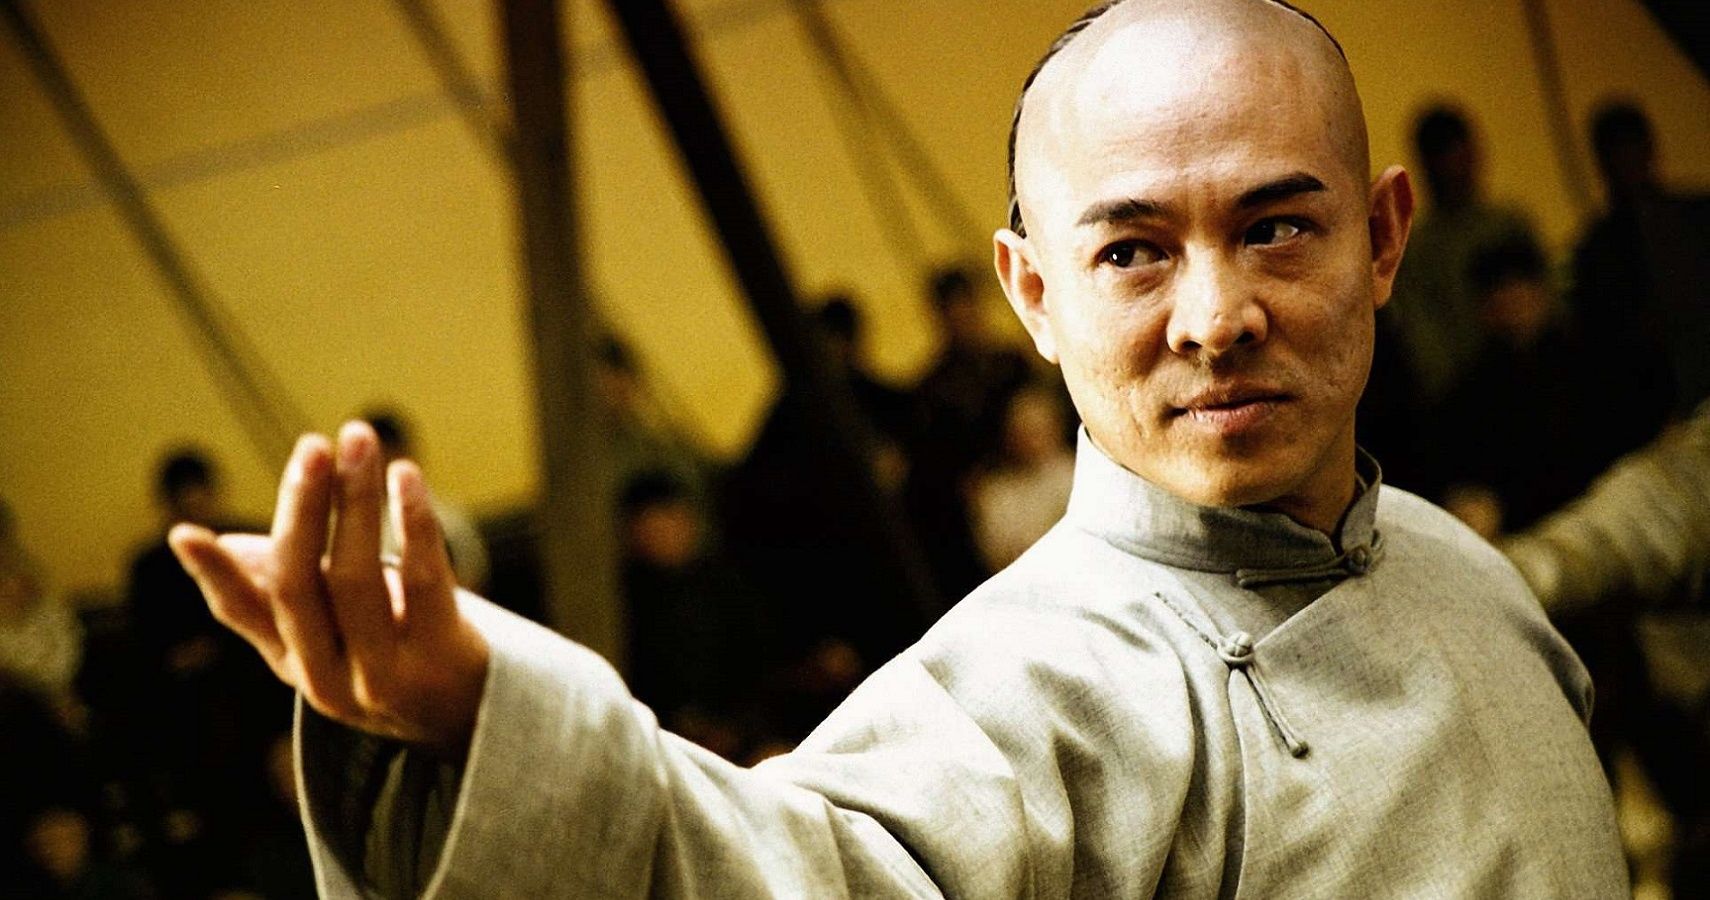 Image of ACTOR JET LI POSES AT NEWS CONFERENCE TO PROMOTE 